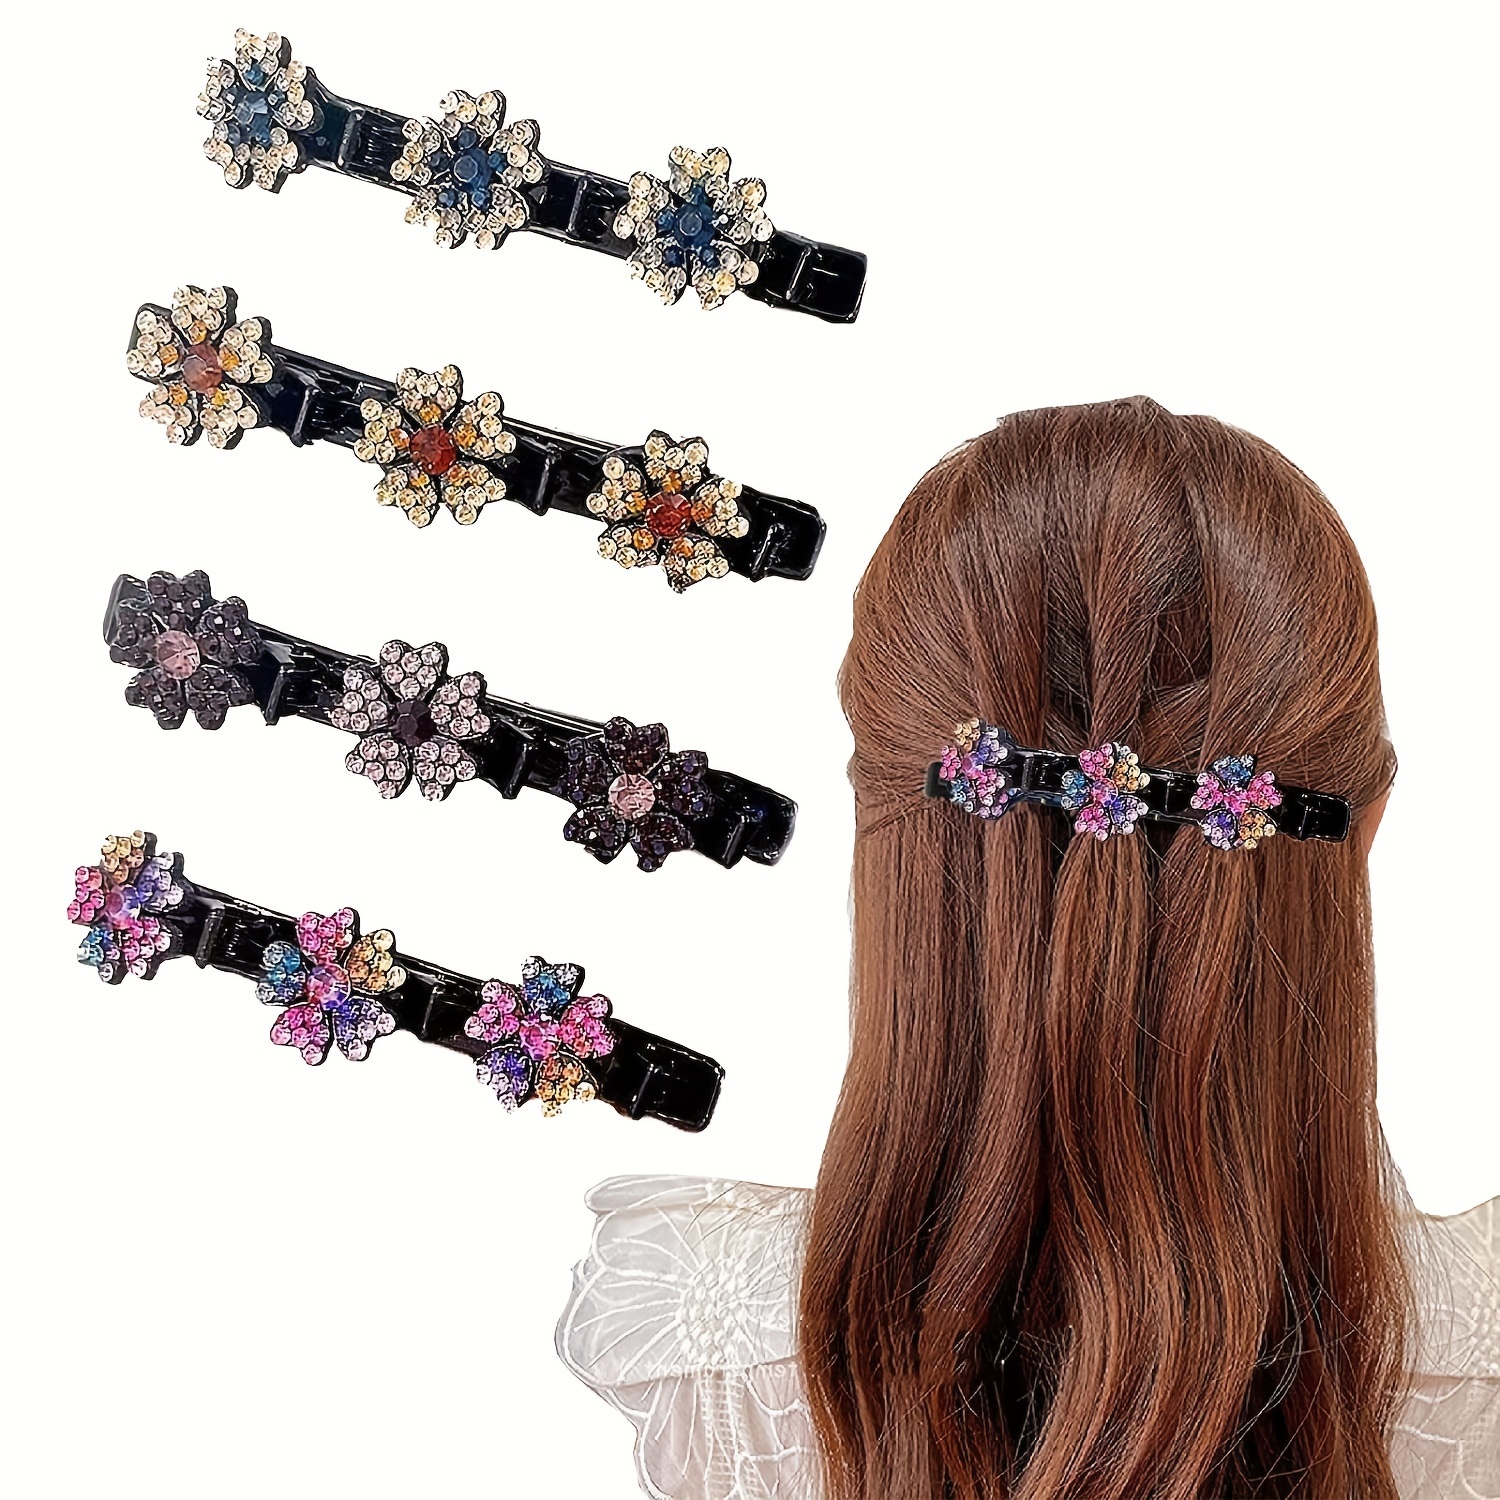 

4 Pcs Sparkling Crystal Braided Hair Clips For Women Vintage Fashion Flower Styling With 3 Small Hair Clips For New Year Party Christmas Party